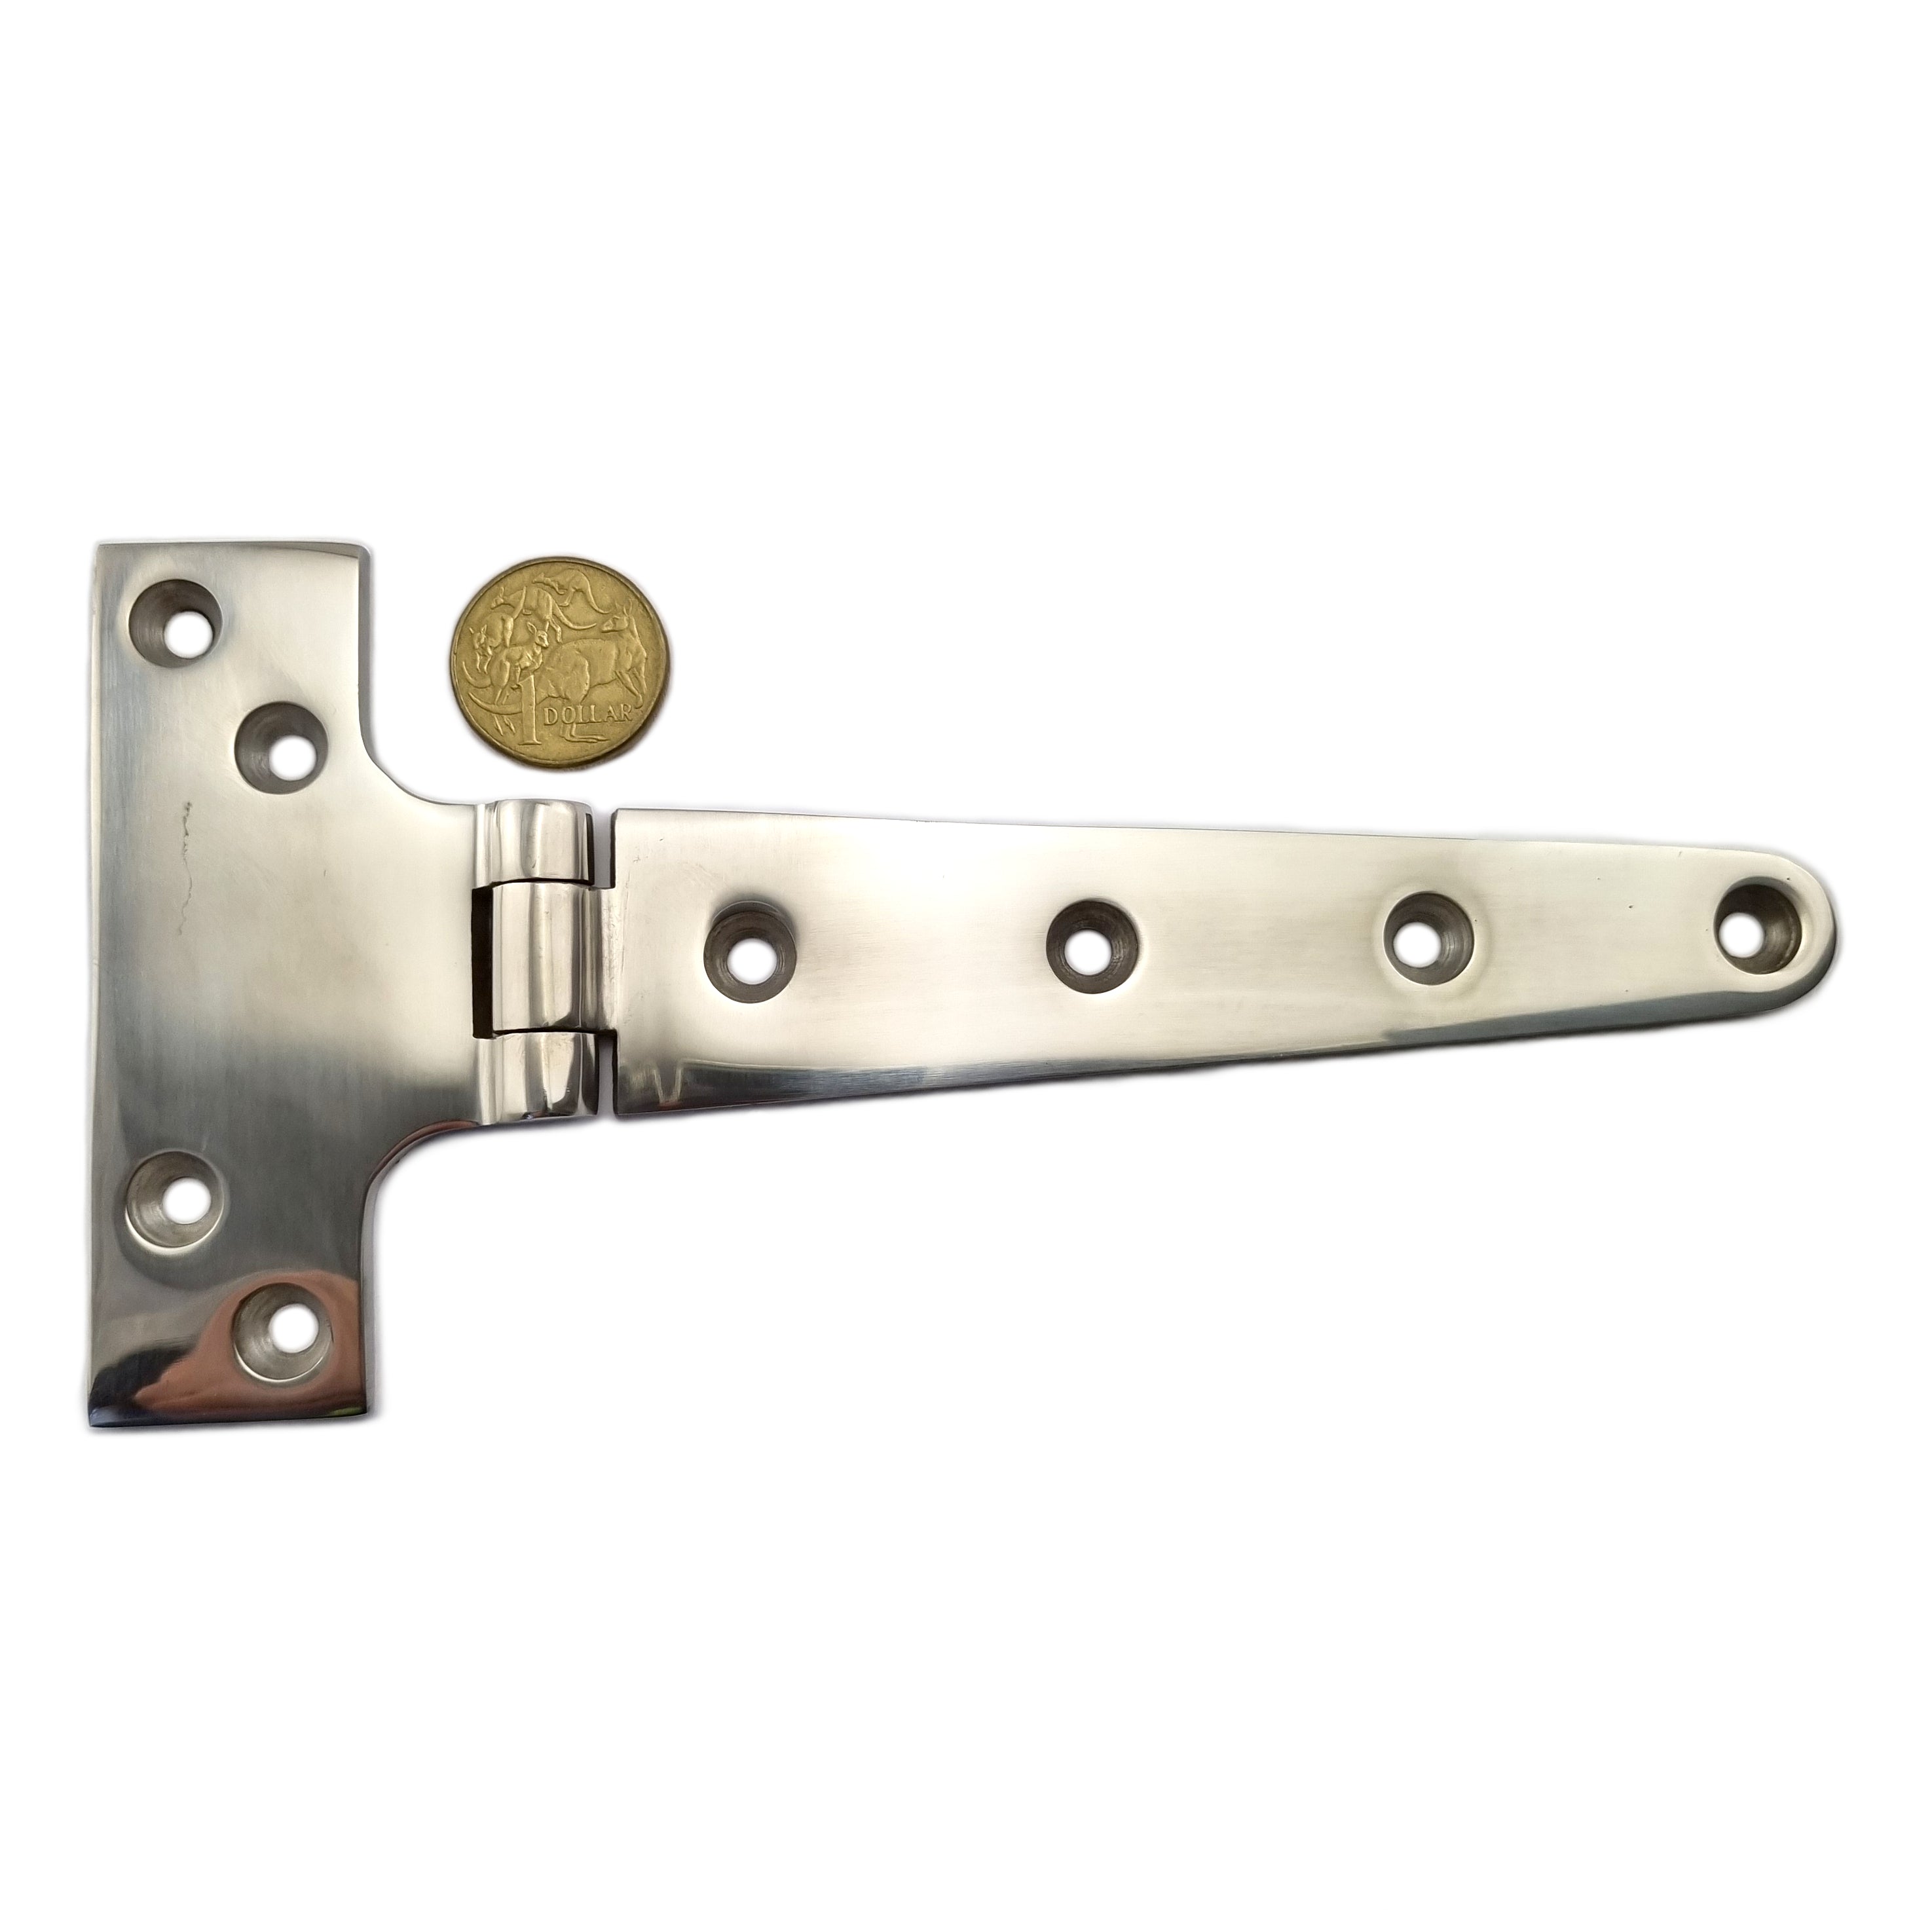 Flat T Hinge in type 316 marine grade stainless steel, size 98mm x 195mm. Shop hardware chain.com.au